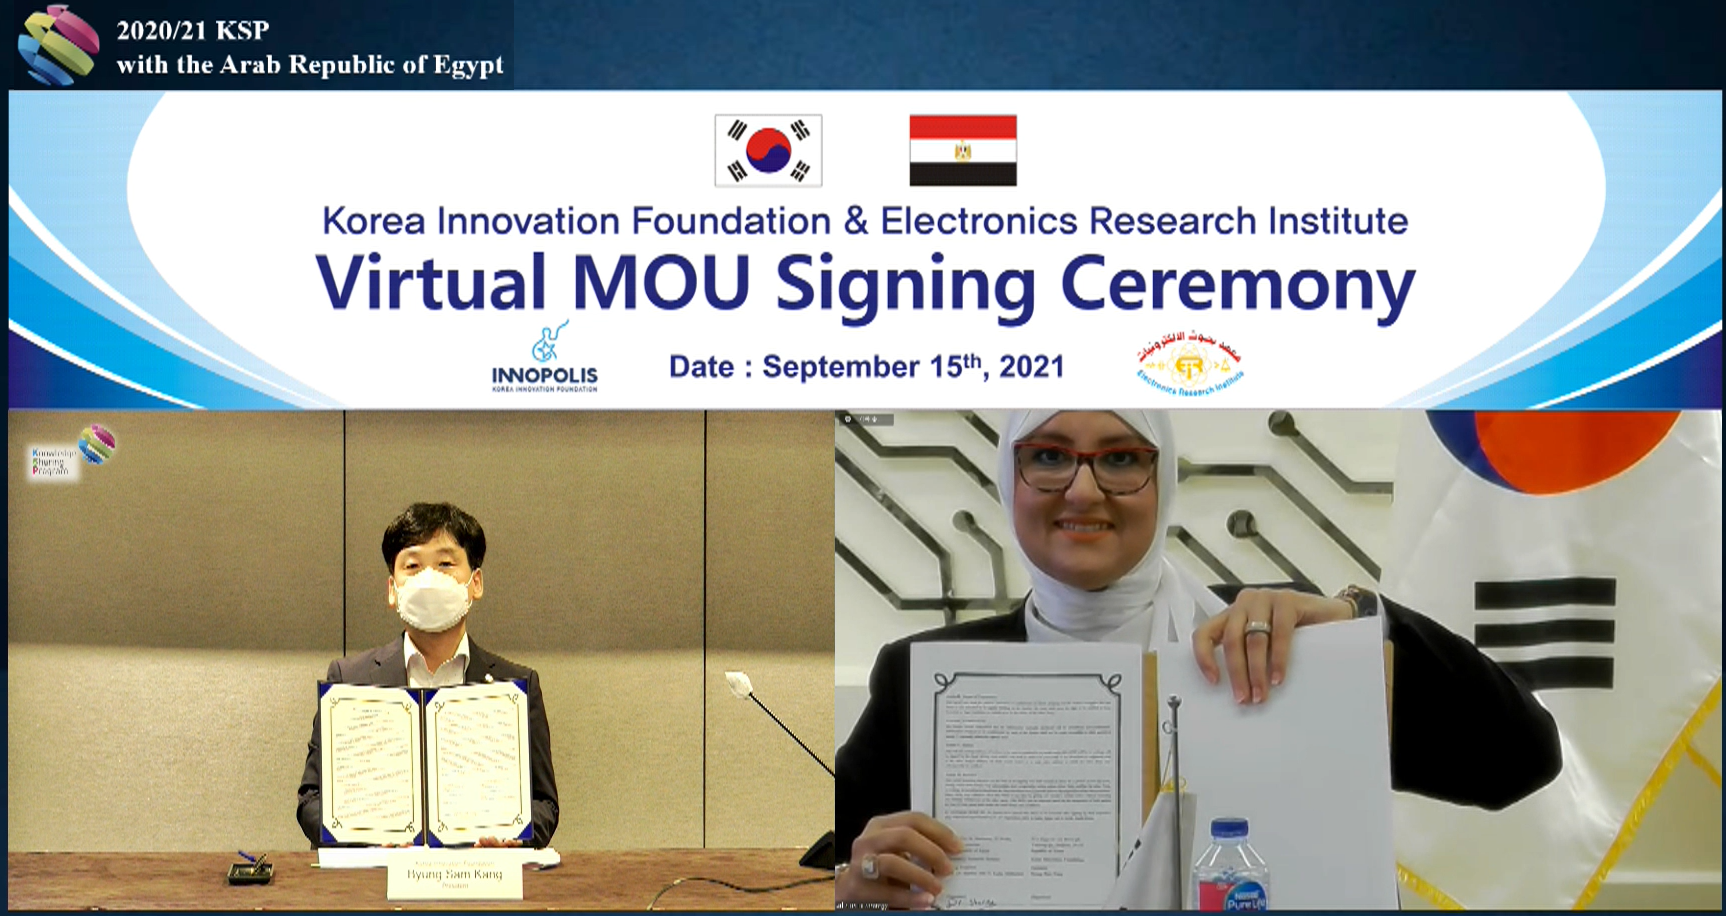 Signed a business agreement to establish a science complex in the field of electronic engineering in Egypt